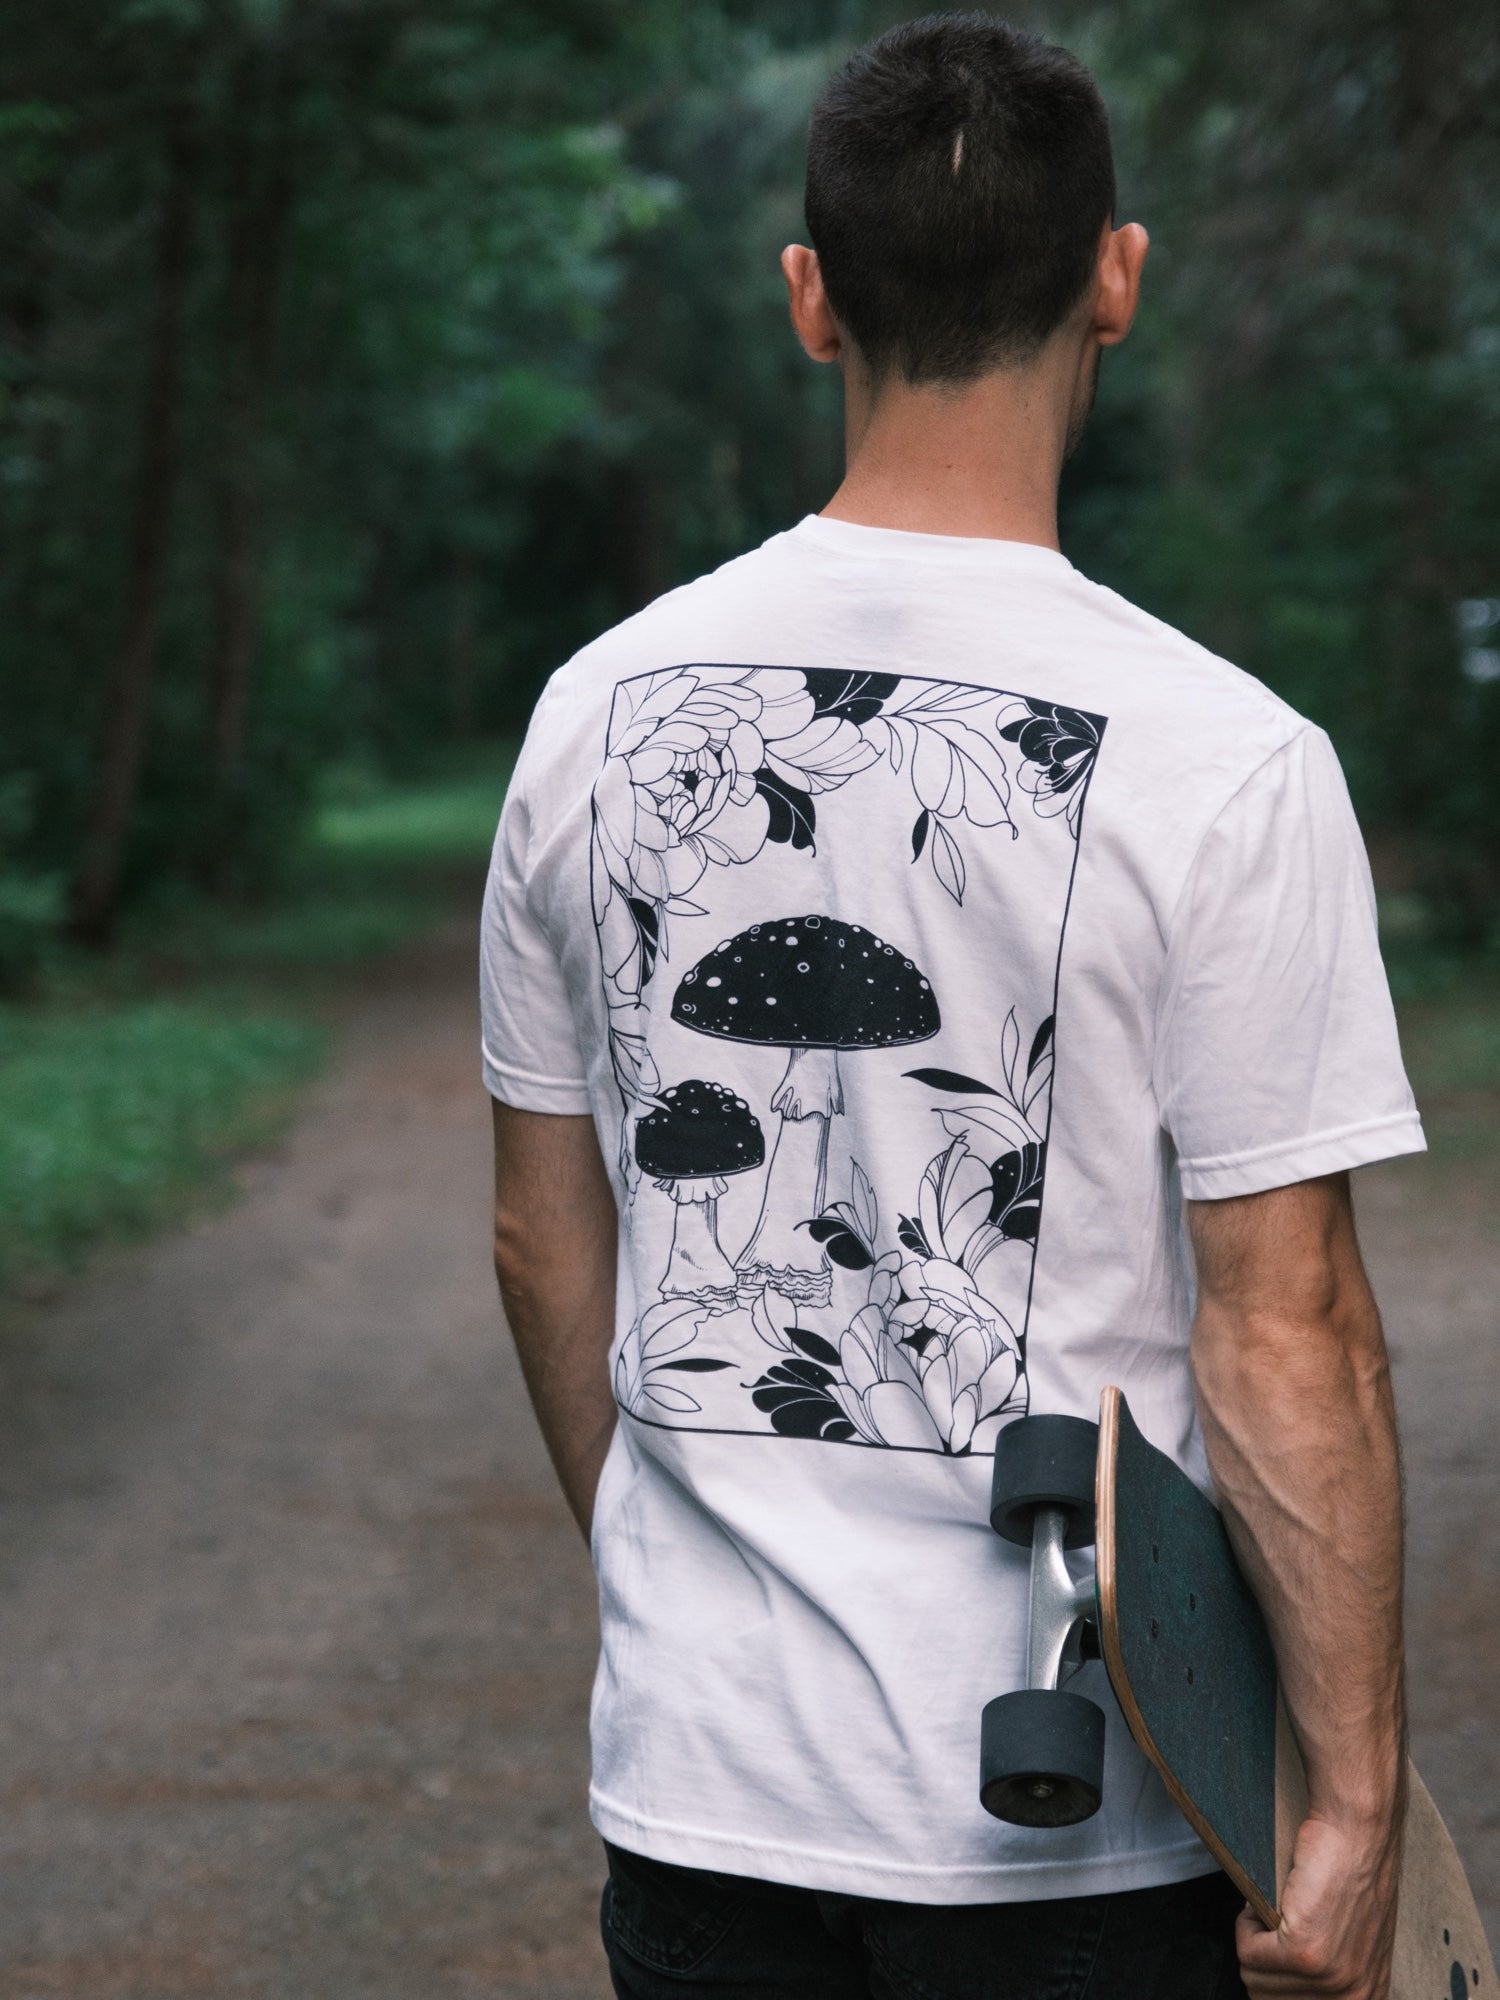 Amanita Muscaria Mushroom surrounded by tattoo-inspired florals on a white tee